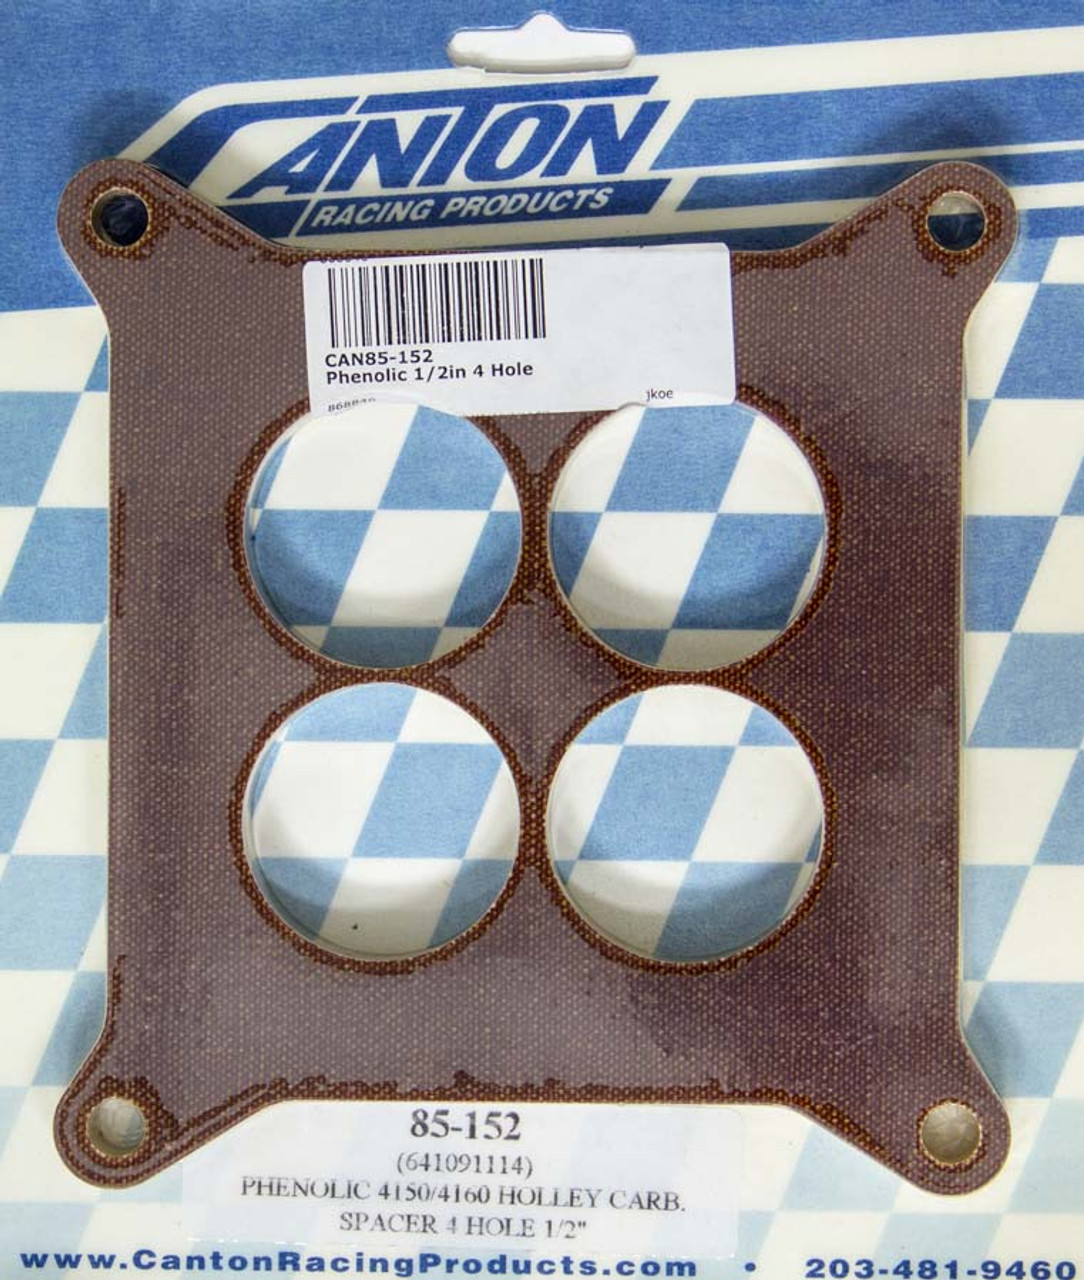 Canton Phenolic 1/2in 4 Hole  - CAN85-152